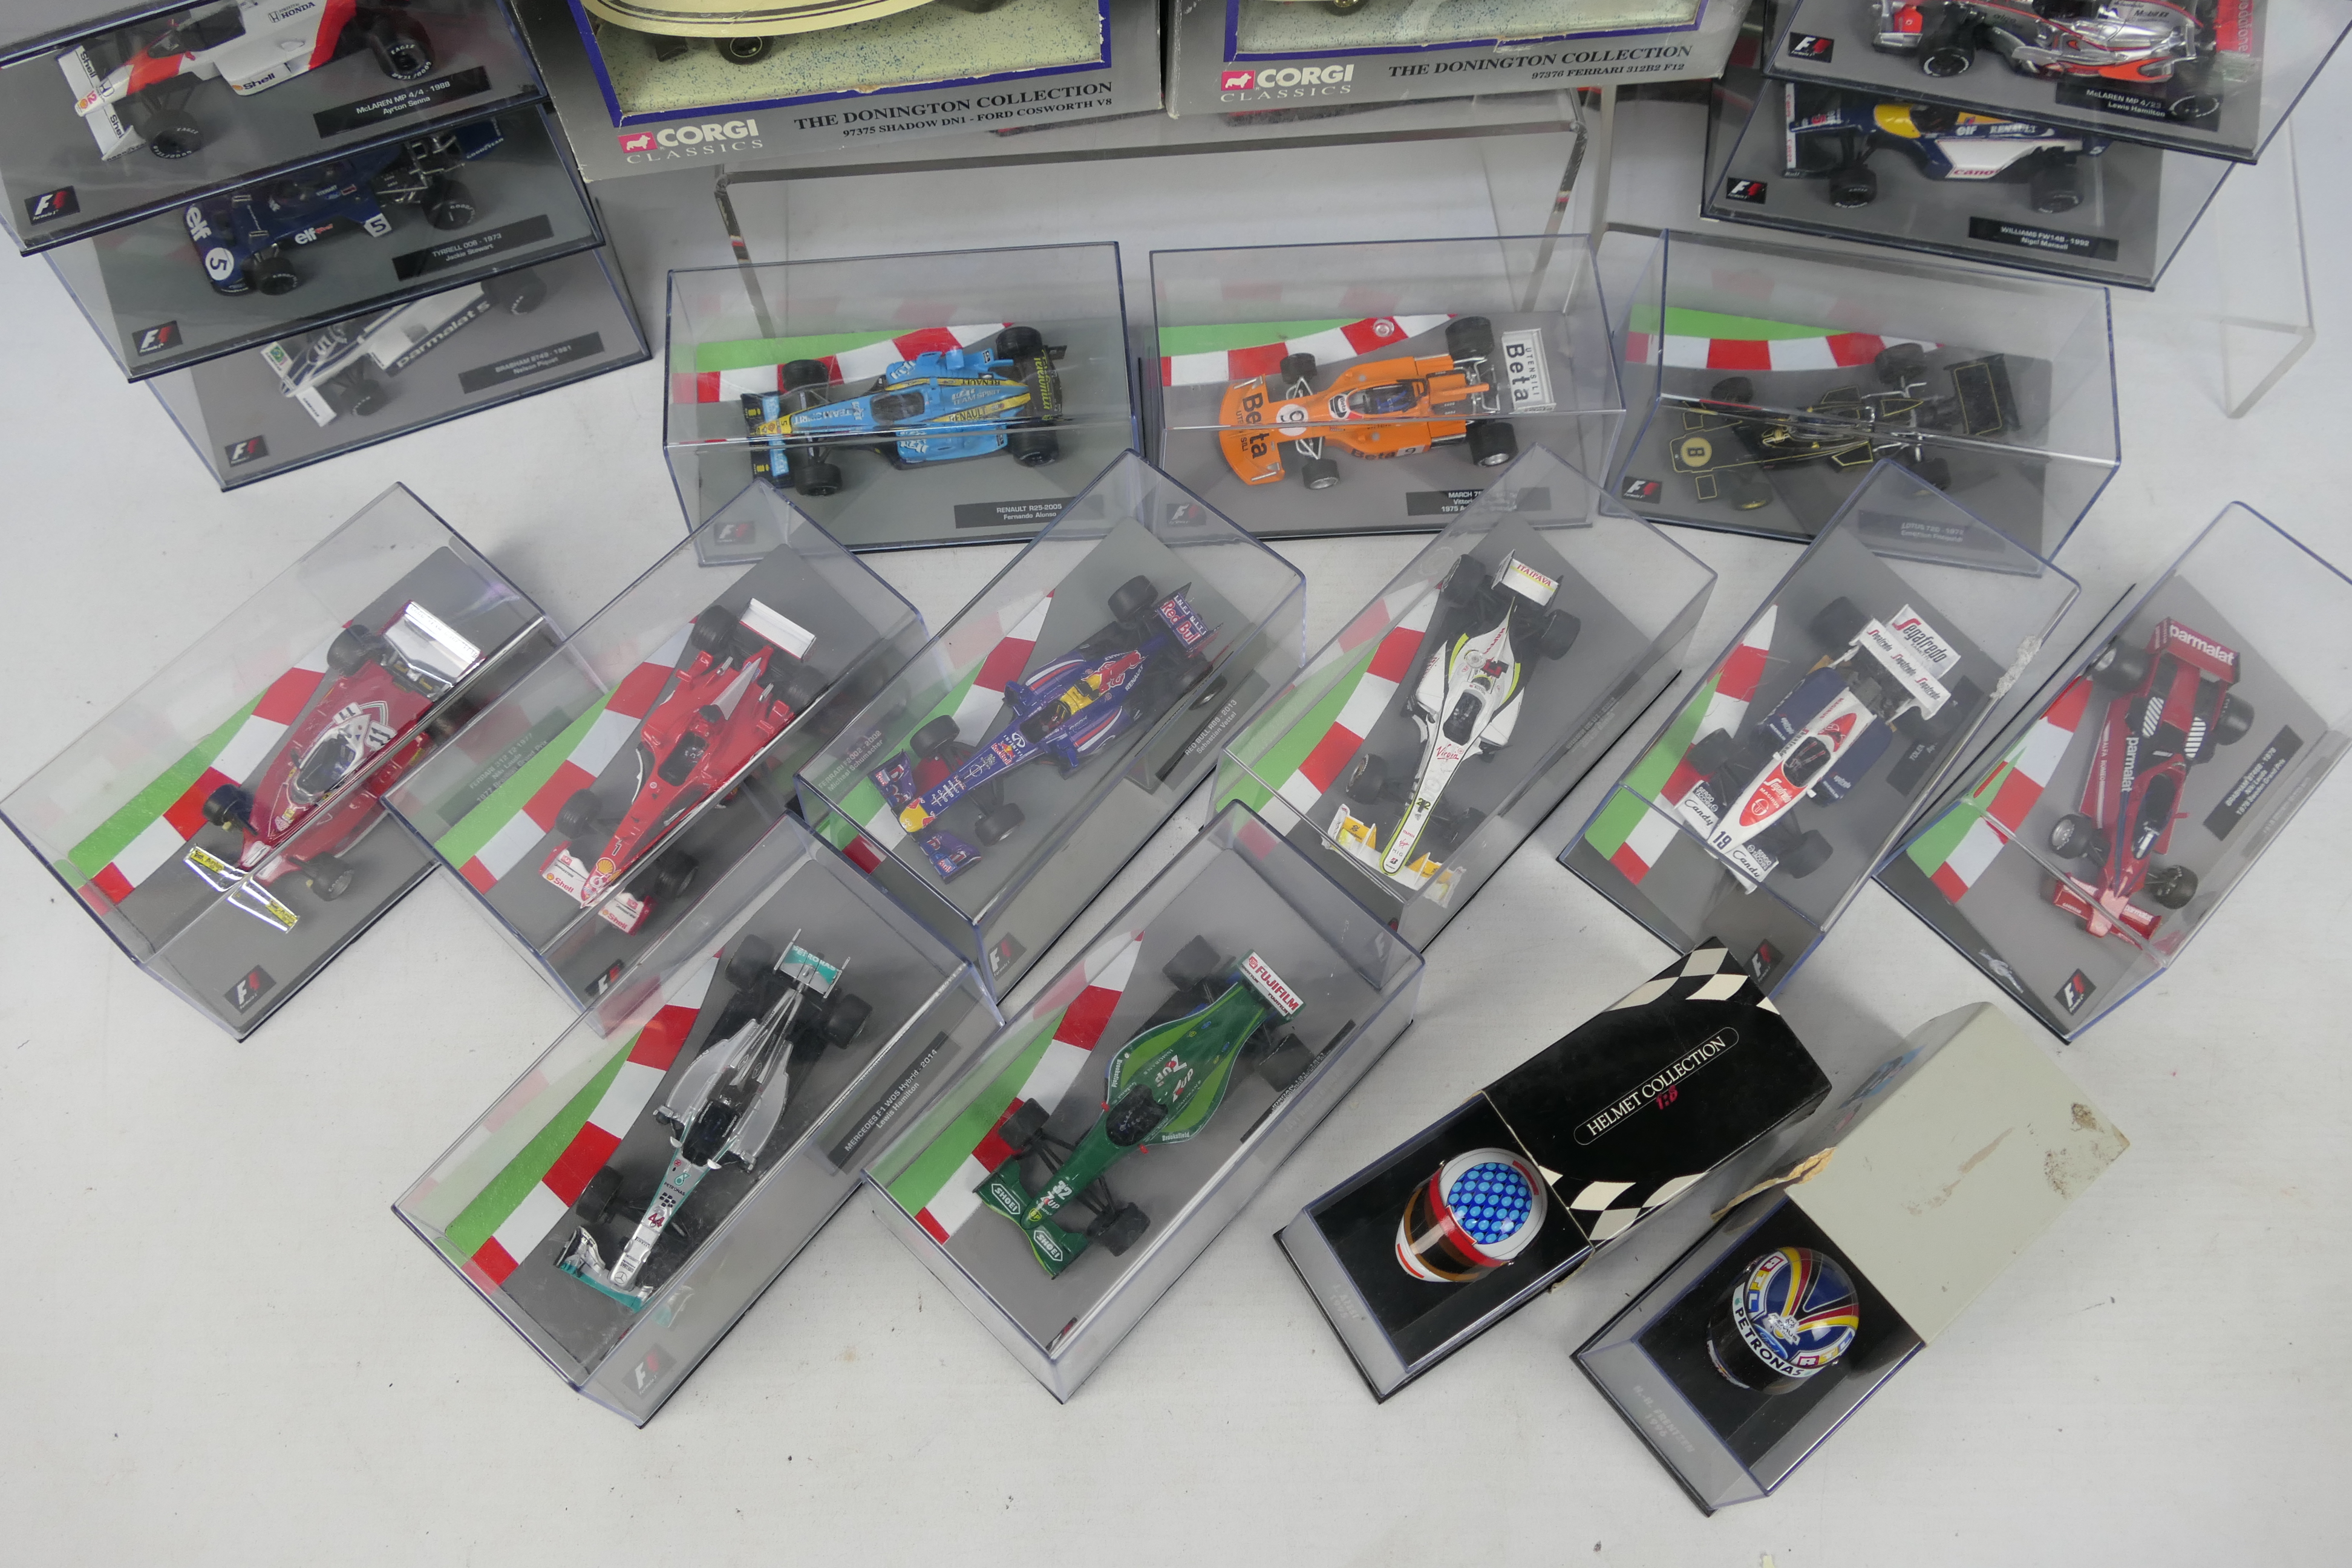 Panini F1 Car Collection - Corgi - Minichamps - A collection of 18 Formula One cars in 1:43 scale - Image 3 of 5